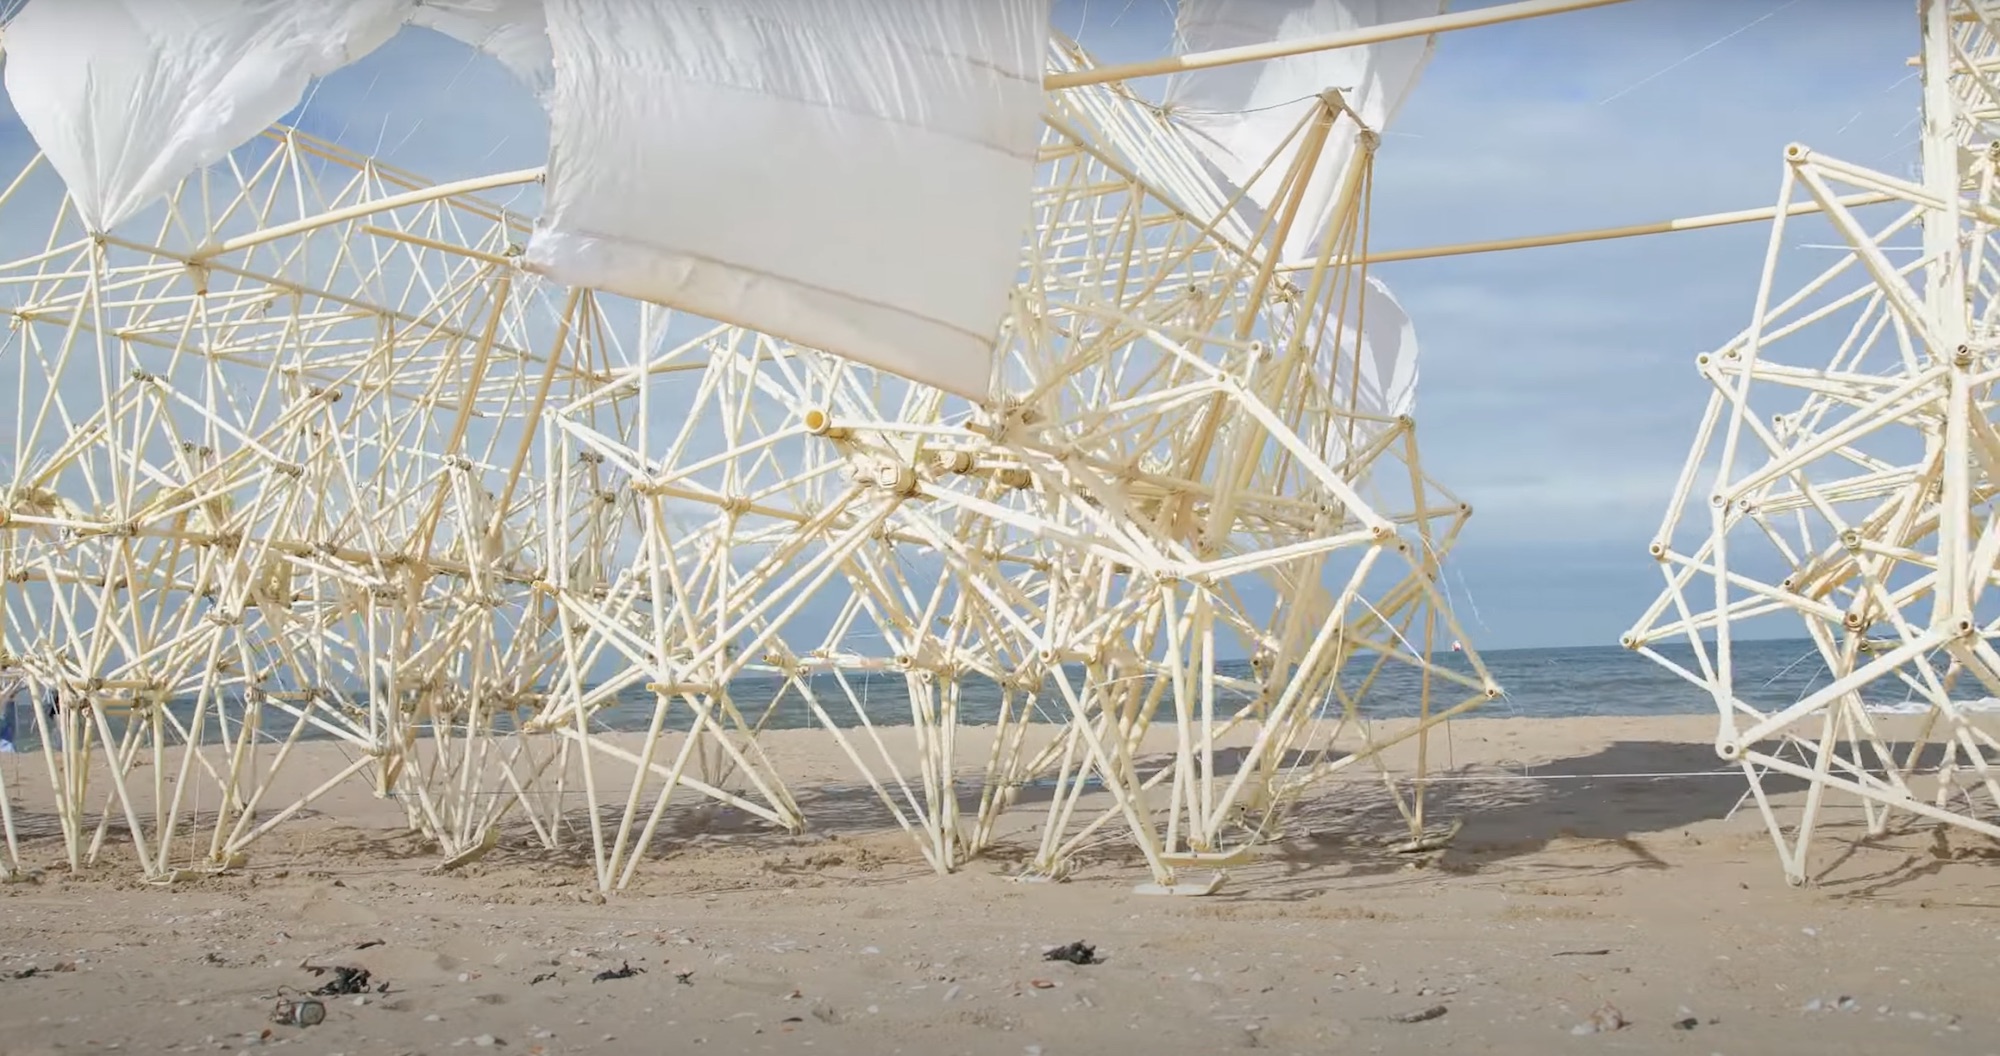 A detail of a kinetic sculpture that moves across a beach using piping and sails in the wind.